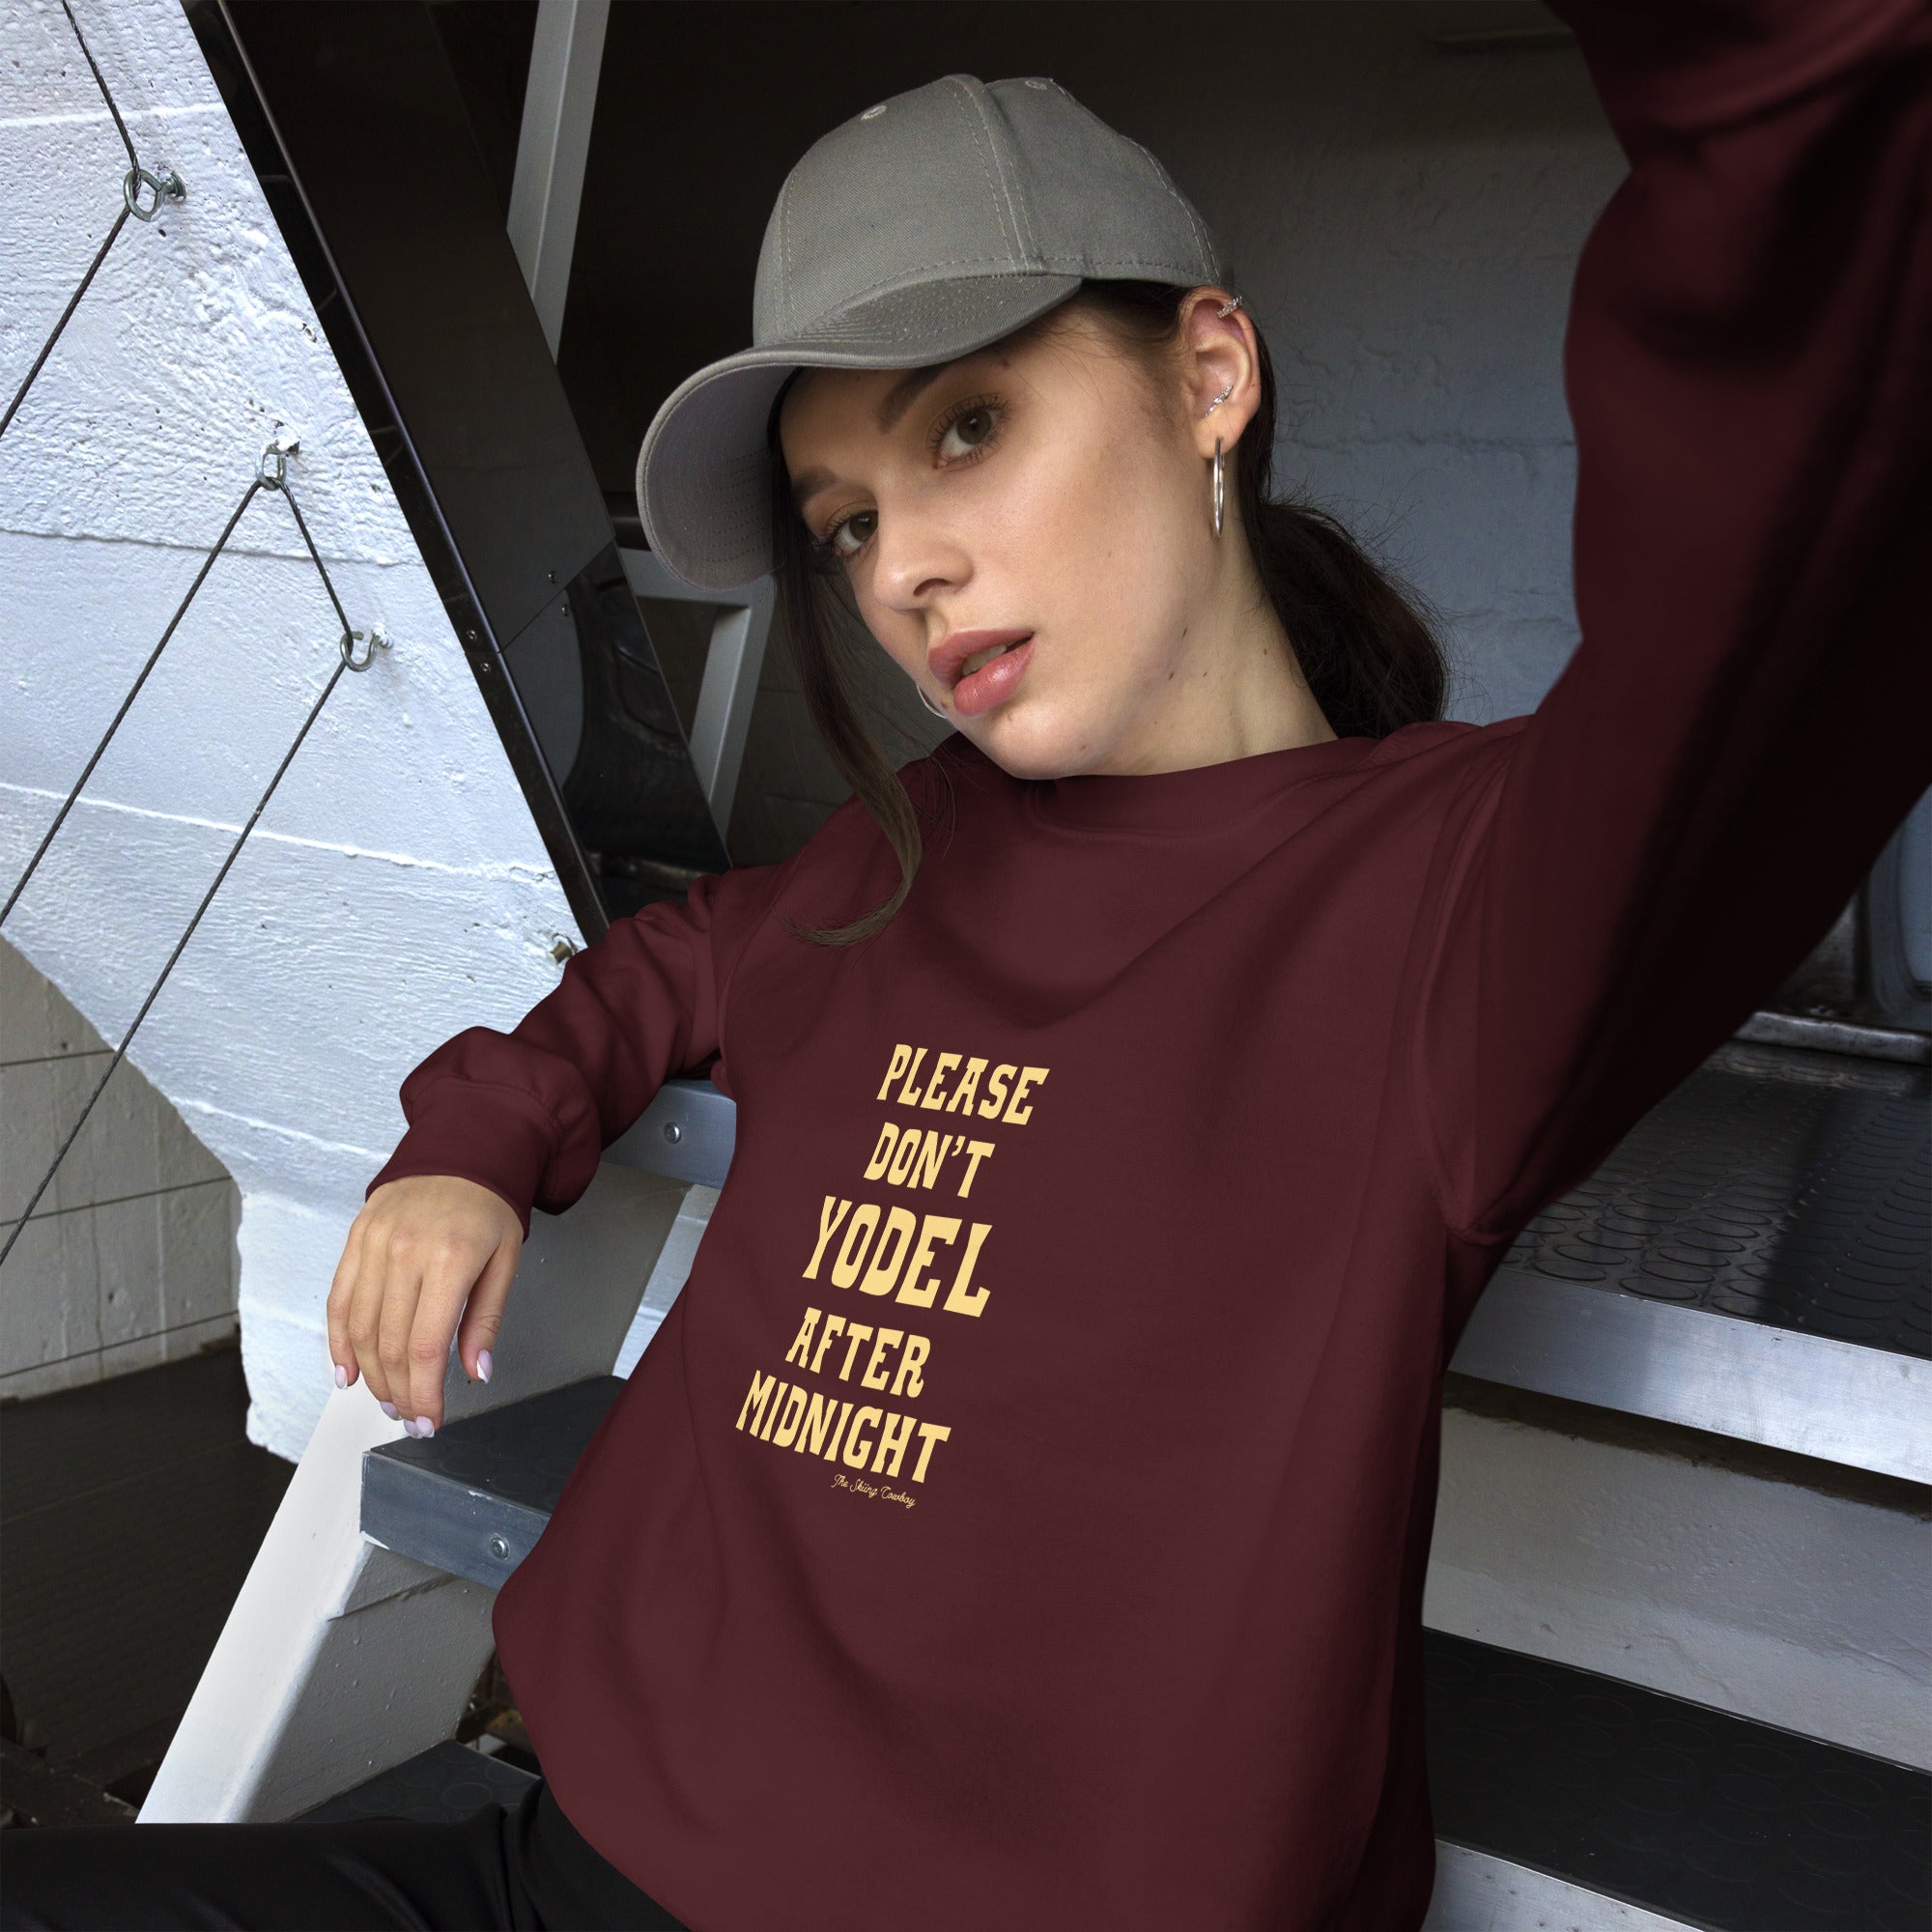 Unisex Sweatshirt Don't Yodel After Midnight light text (front & back)